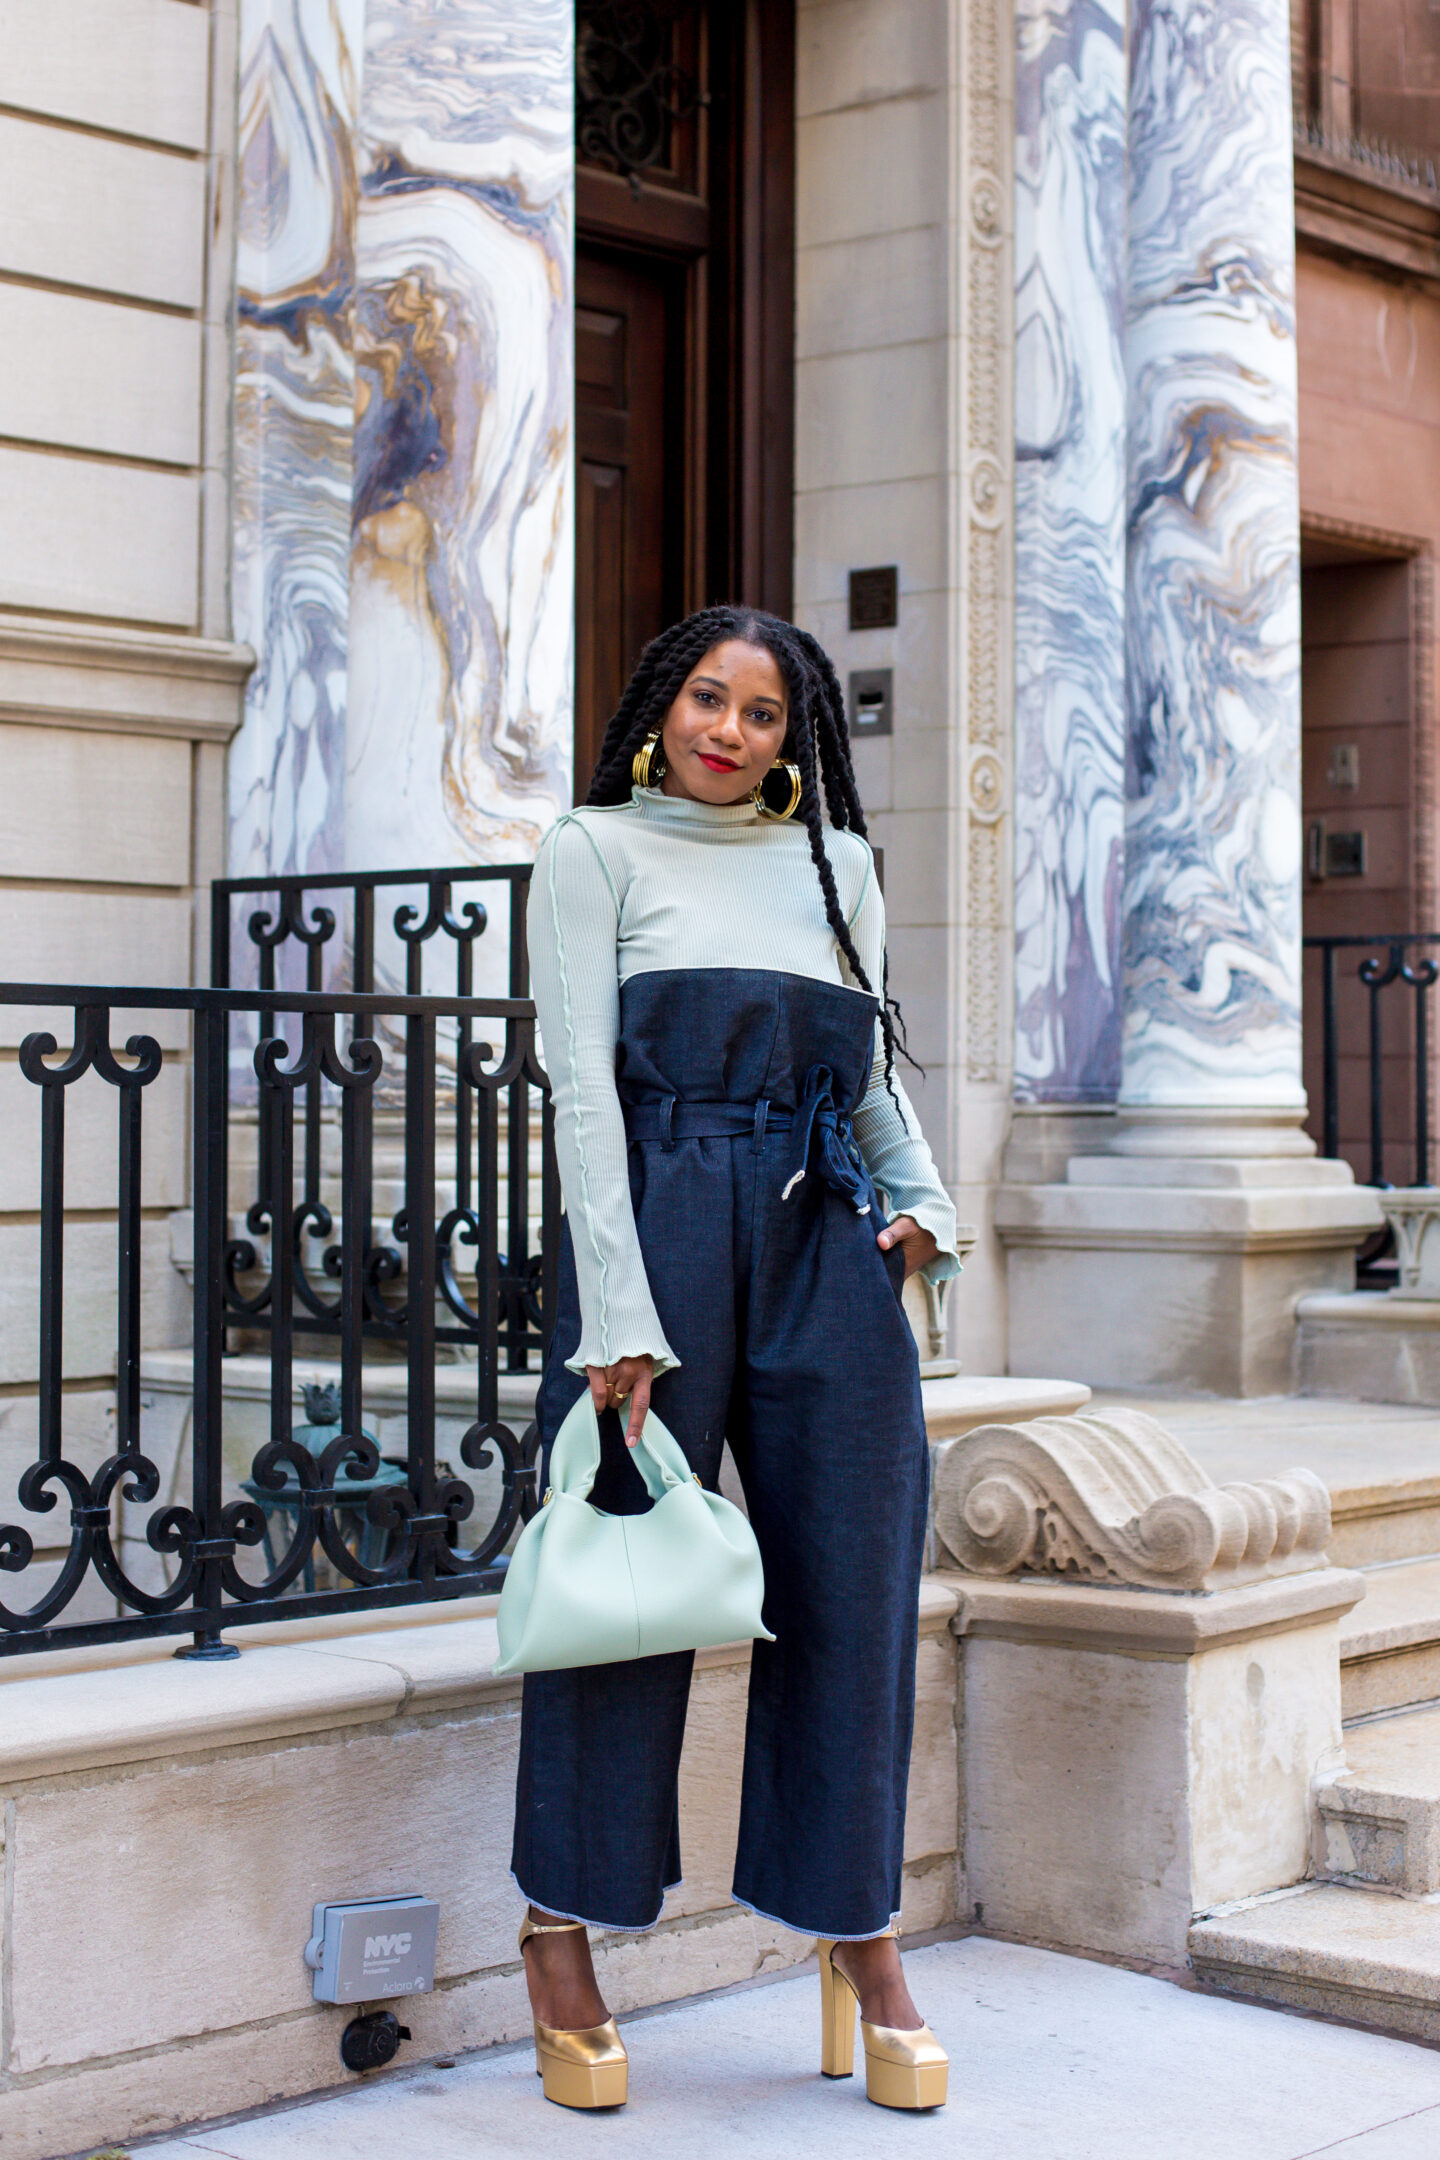 All Black Everything Black History Month – Fashion Steele NYC